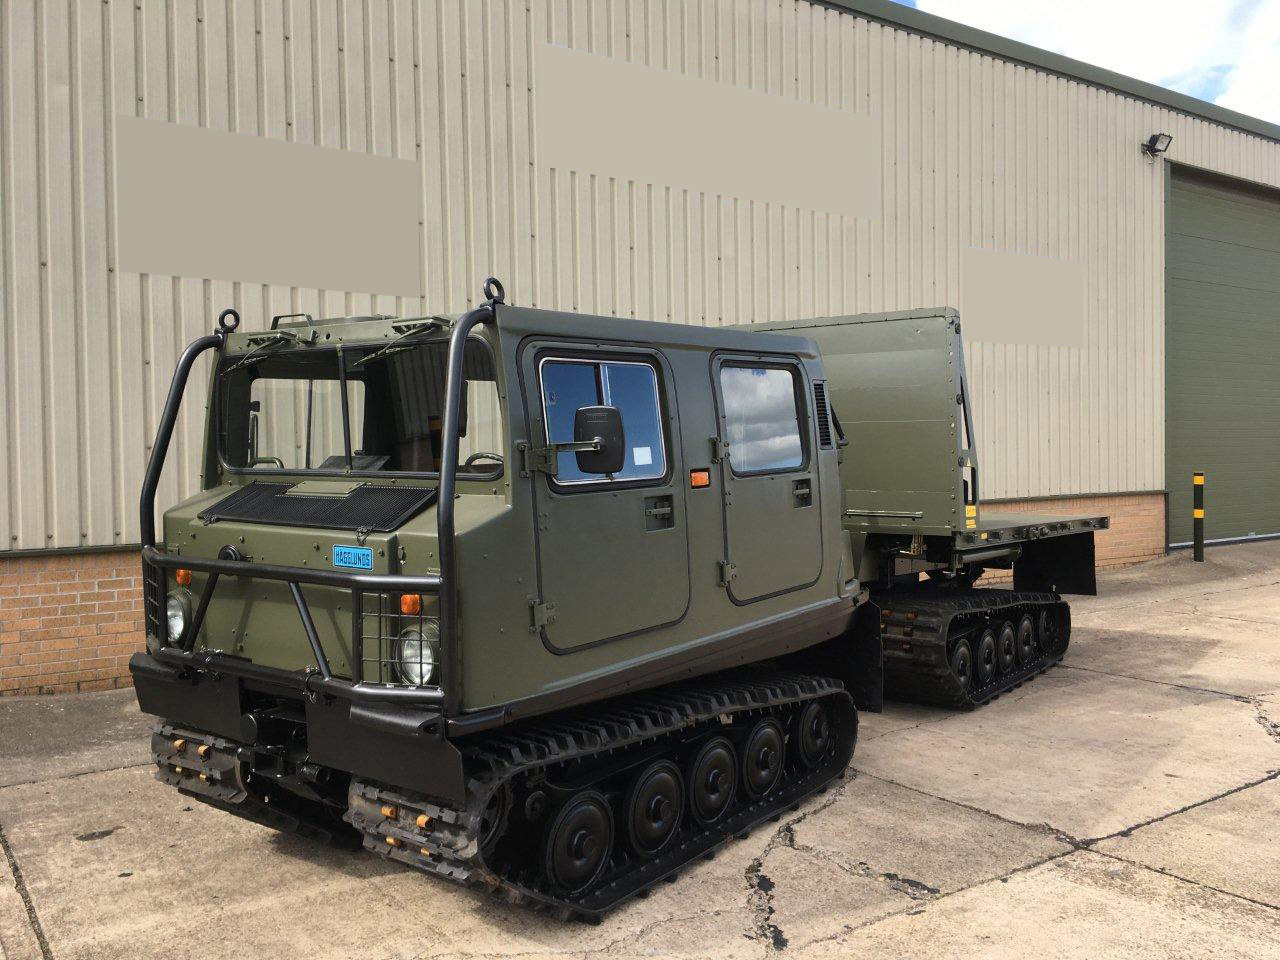 Hagglunds Bv206 Load Carrier with Crane - 50303 - Govsales of mod surplus ex army trucks, ex army land rovers and other military vehicles for sale